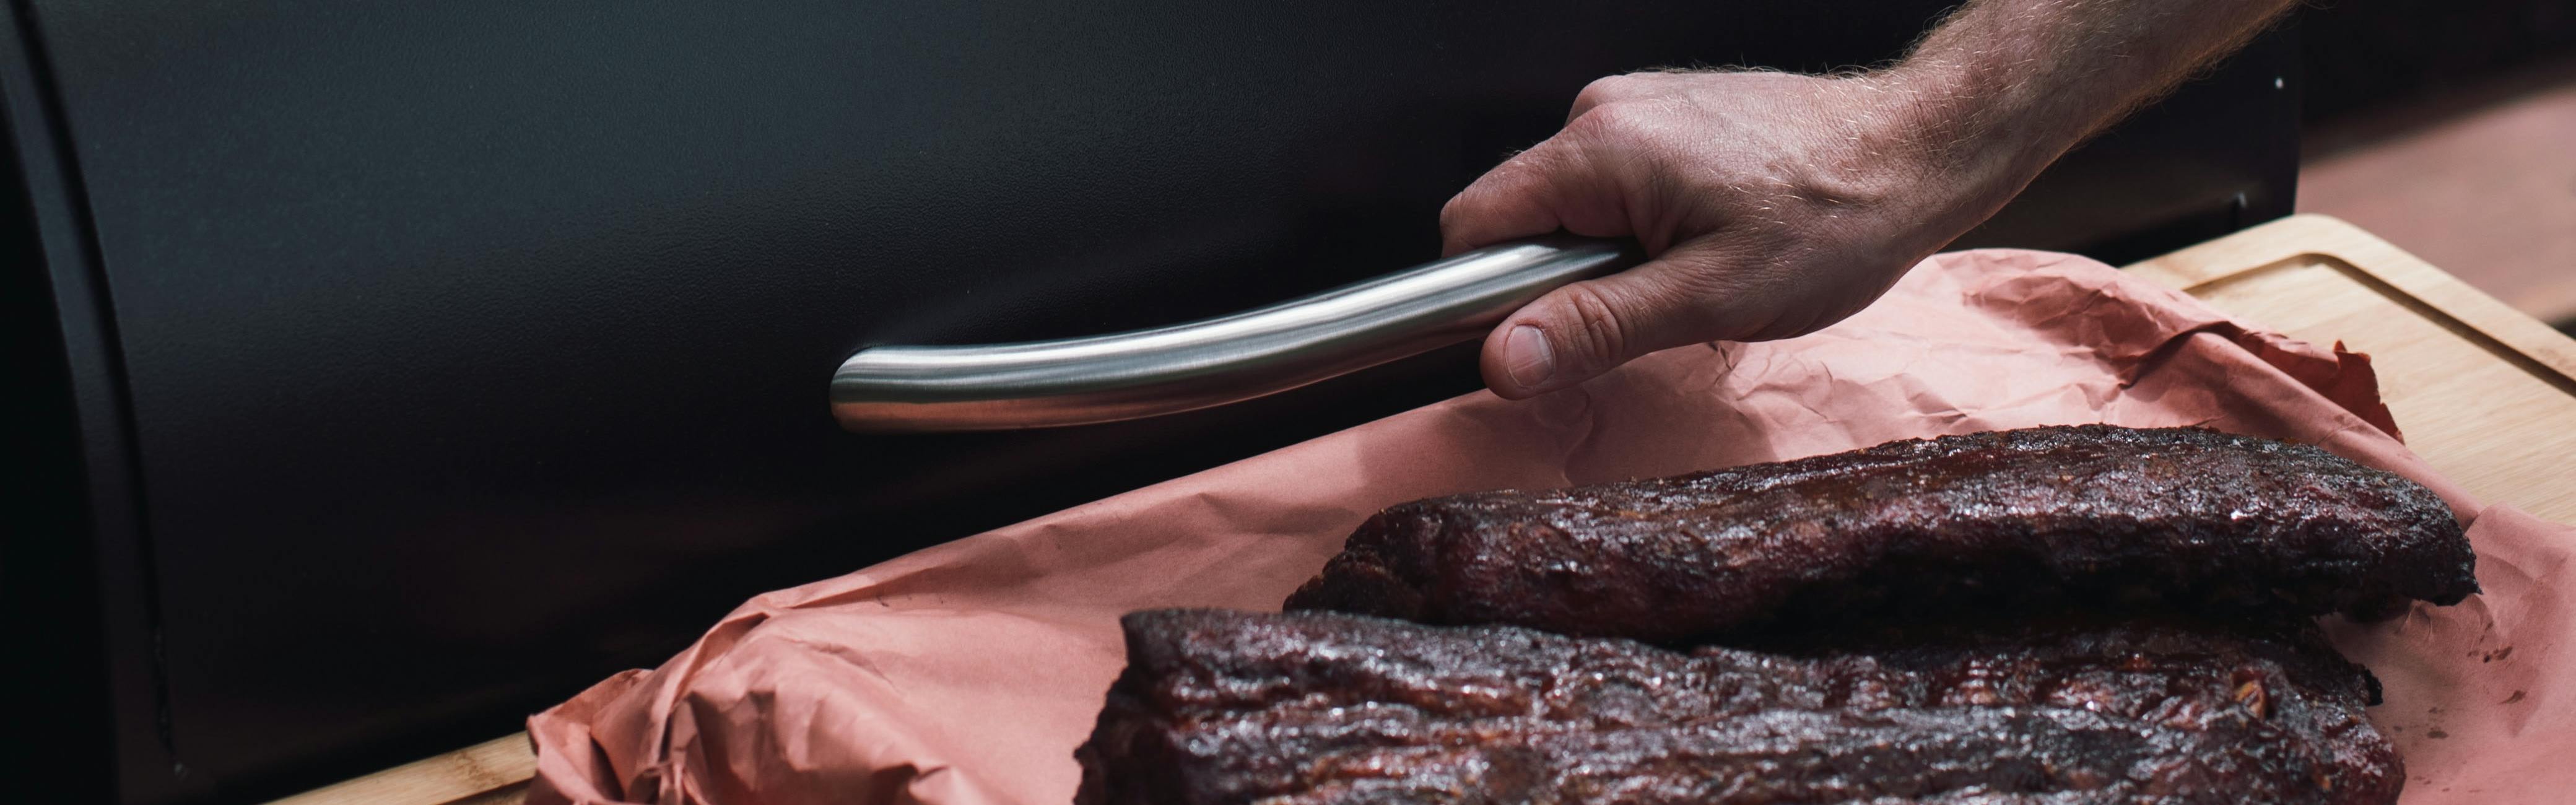 A hand opens a pellet grill with one hand while holding a board of meat with the other hand.